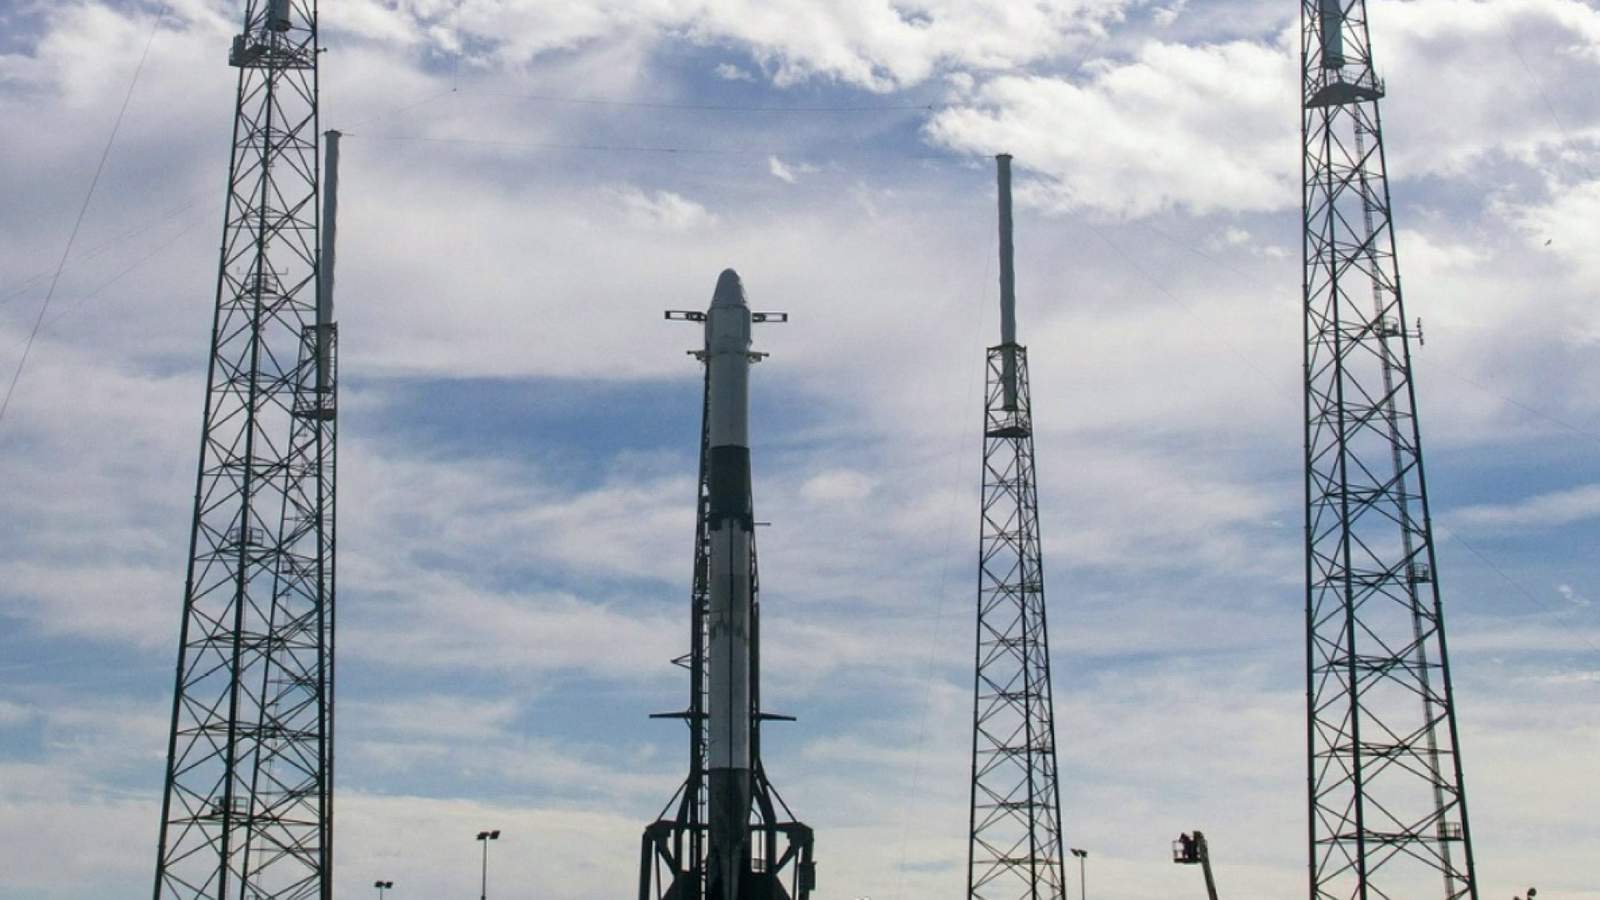 Friday night launch: SpaceX set to launch supplies to space station